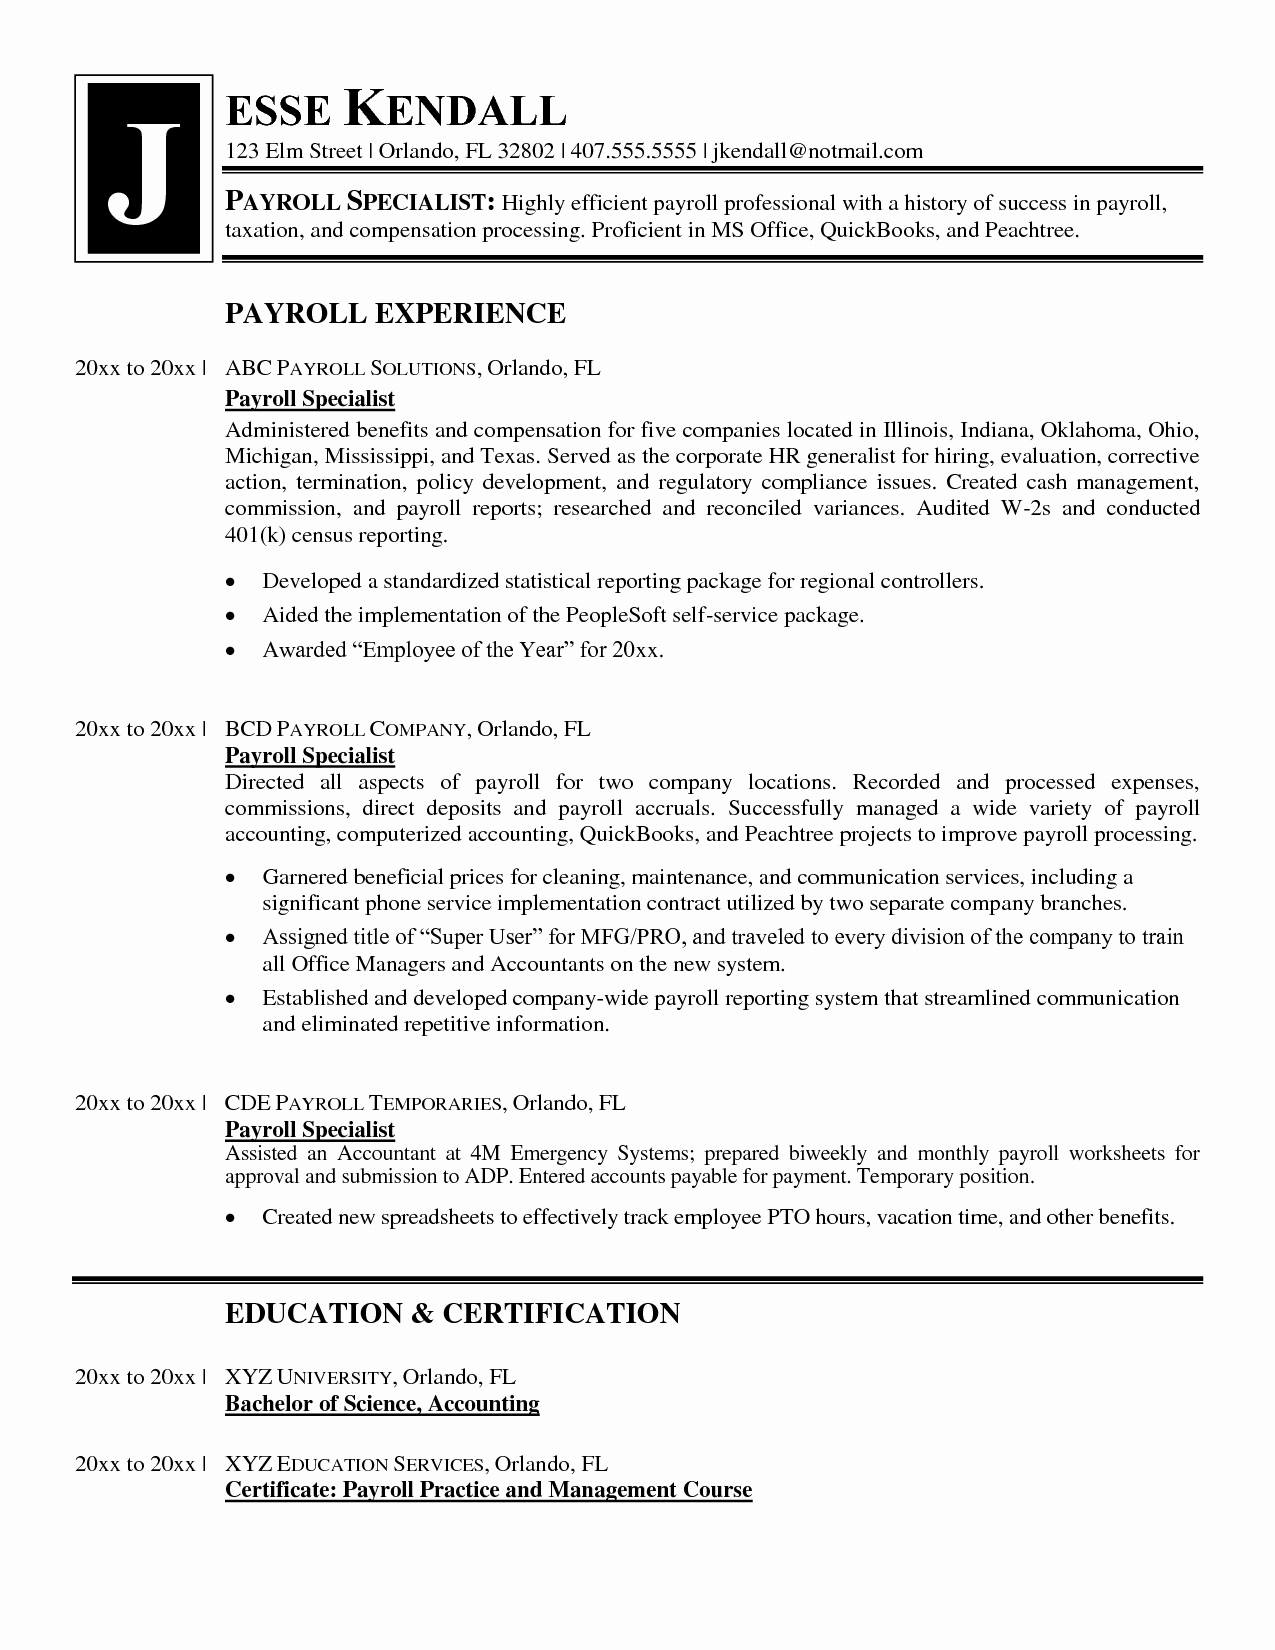 Payroll Specialist Sample Resume with Relevant Work